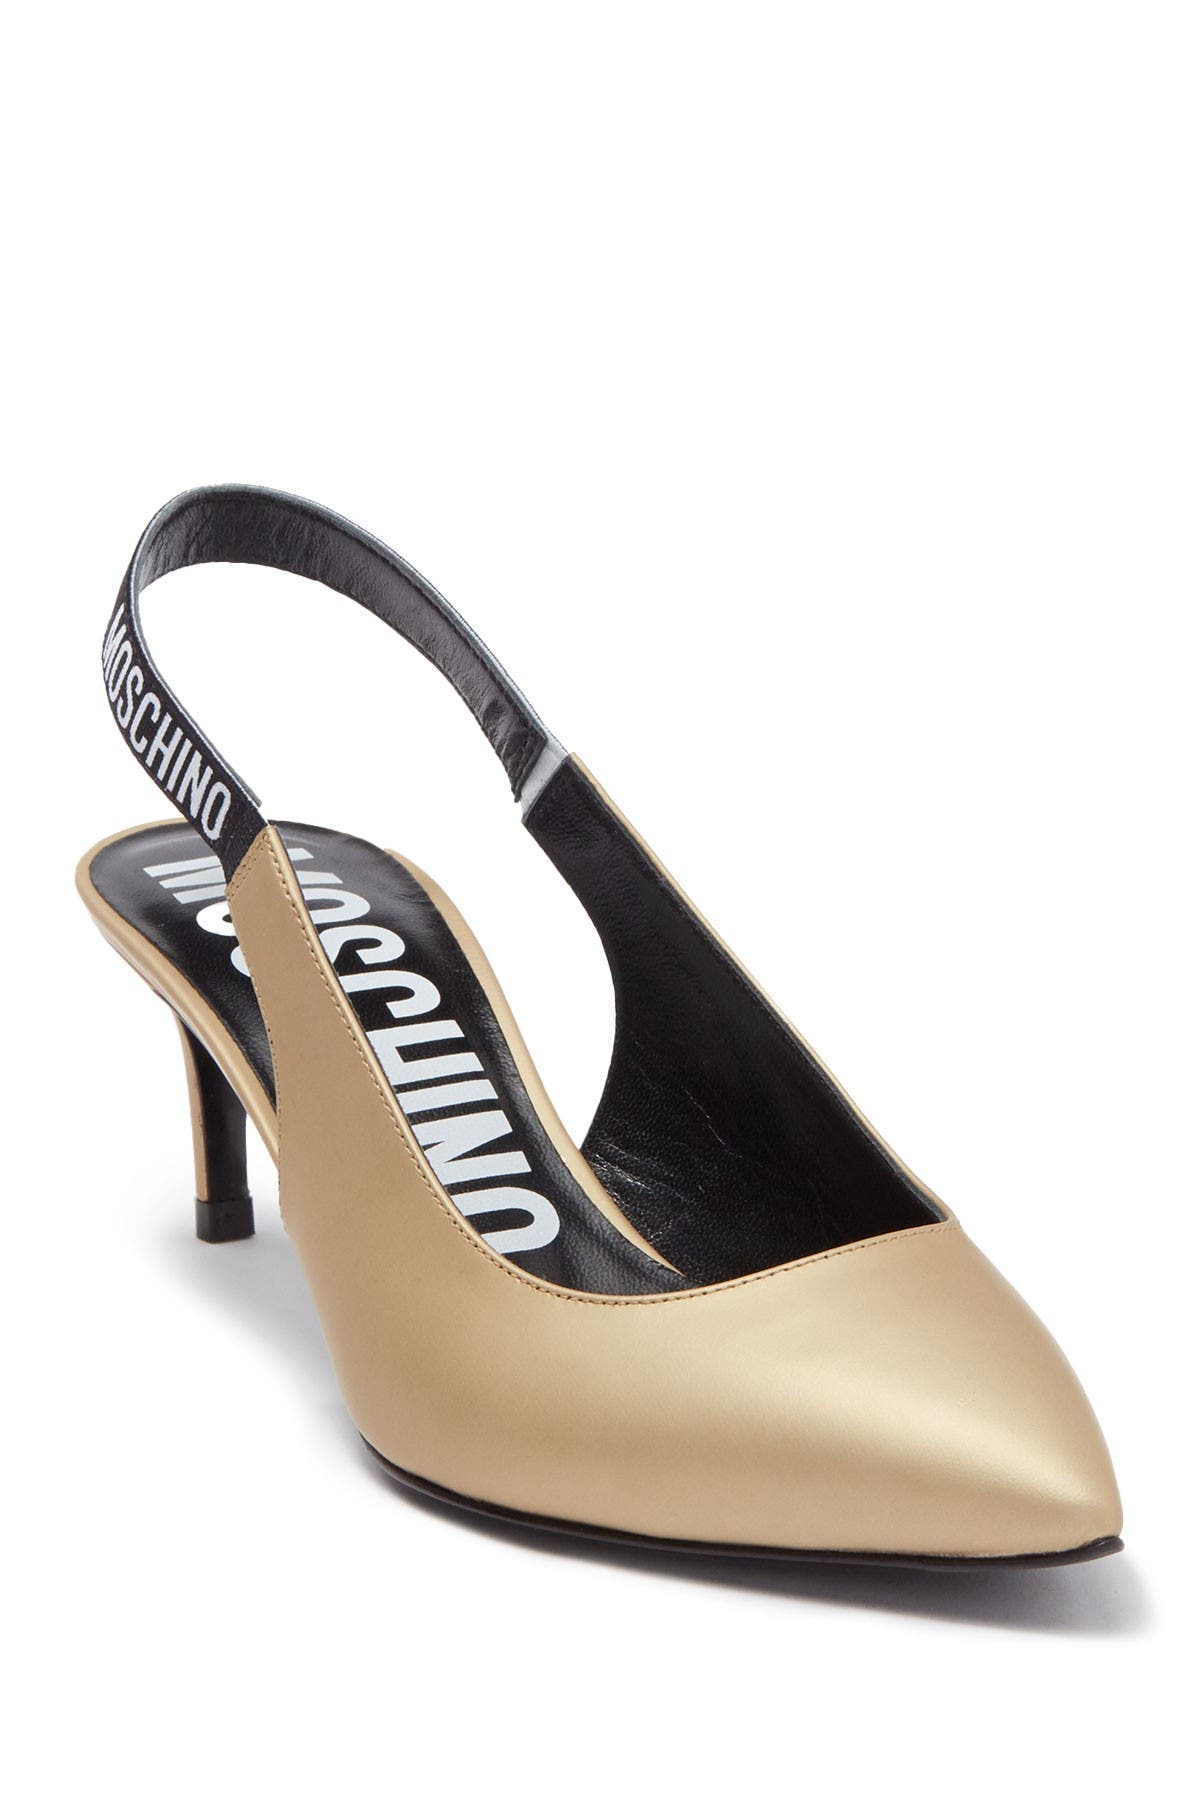 MOSCHINO Women's Shoes | Nordstrom Rack